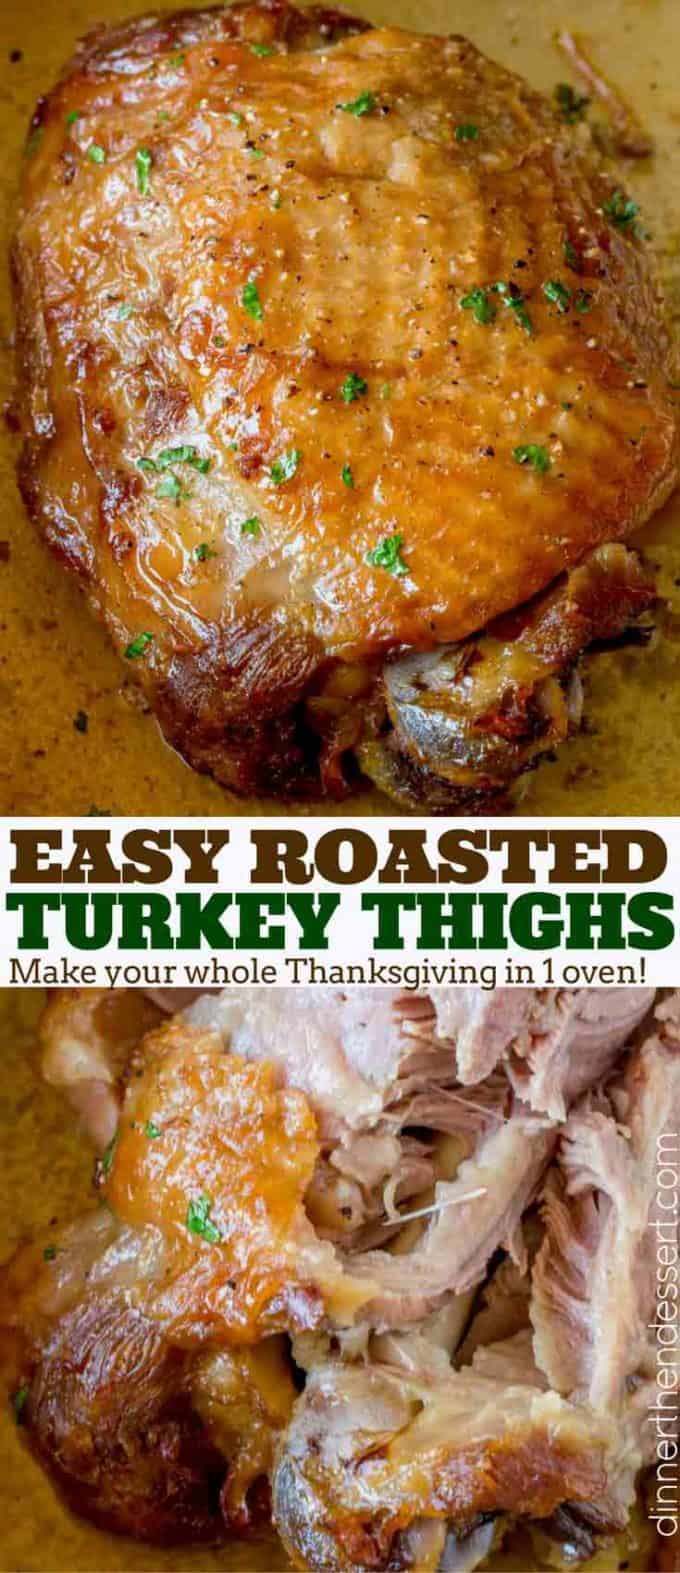 The easiest and most delicious roasted turkey thighs you'll ever eat and with almost no effort! #turkey #thanksgiving #holidays #smallbatch #recipe